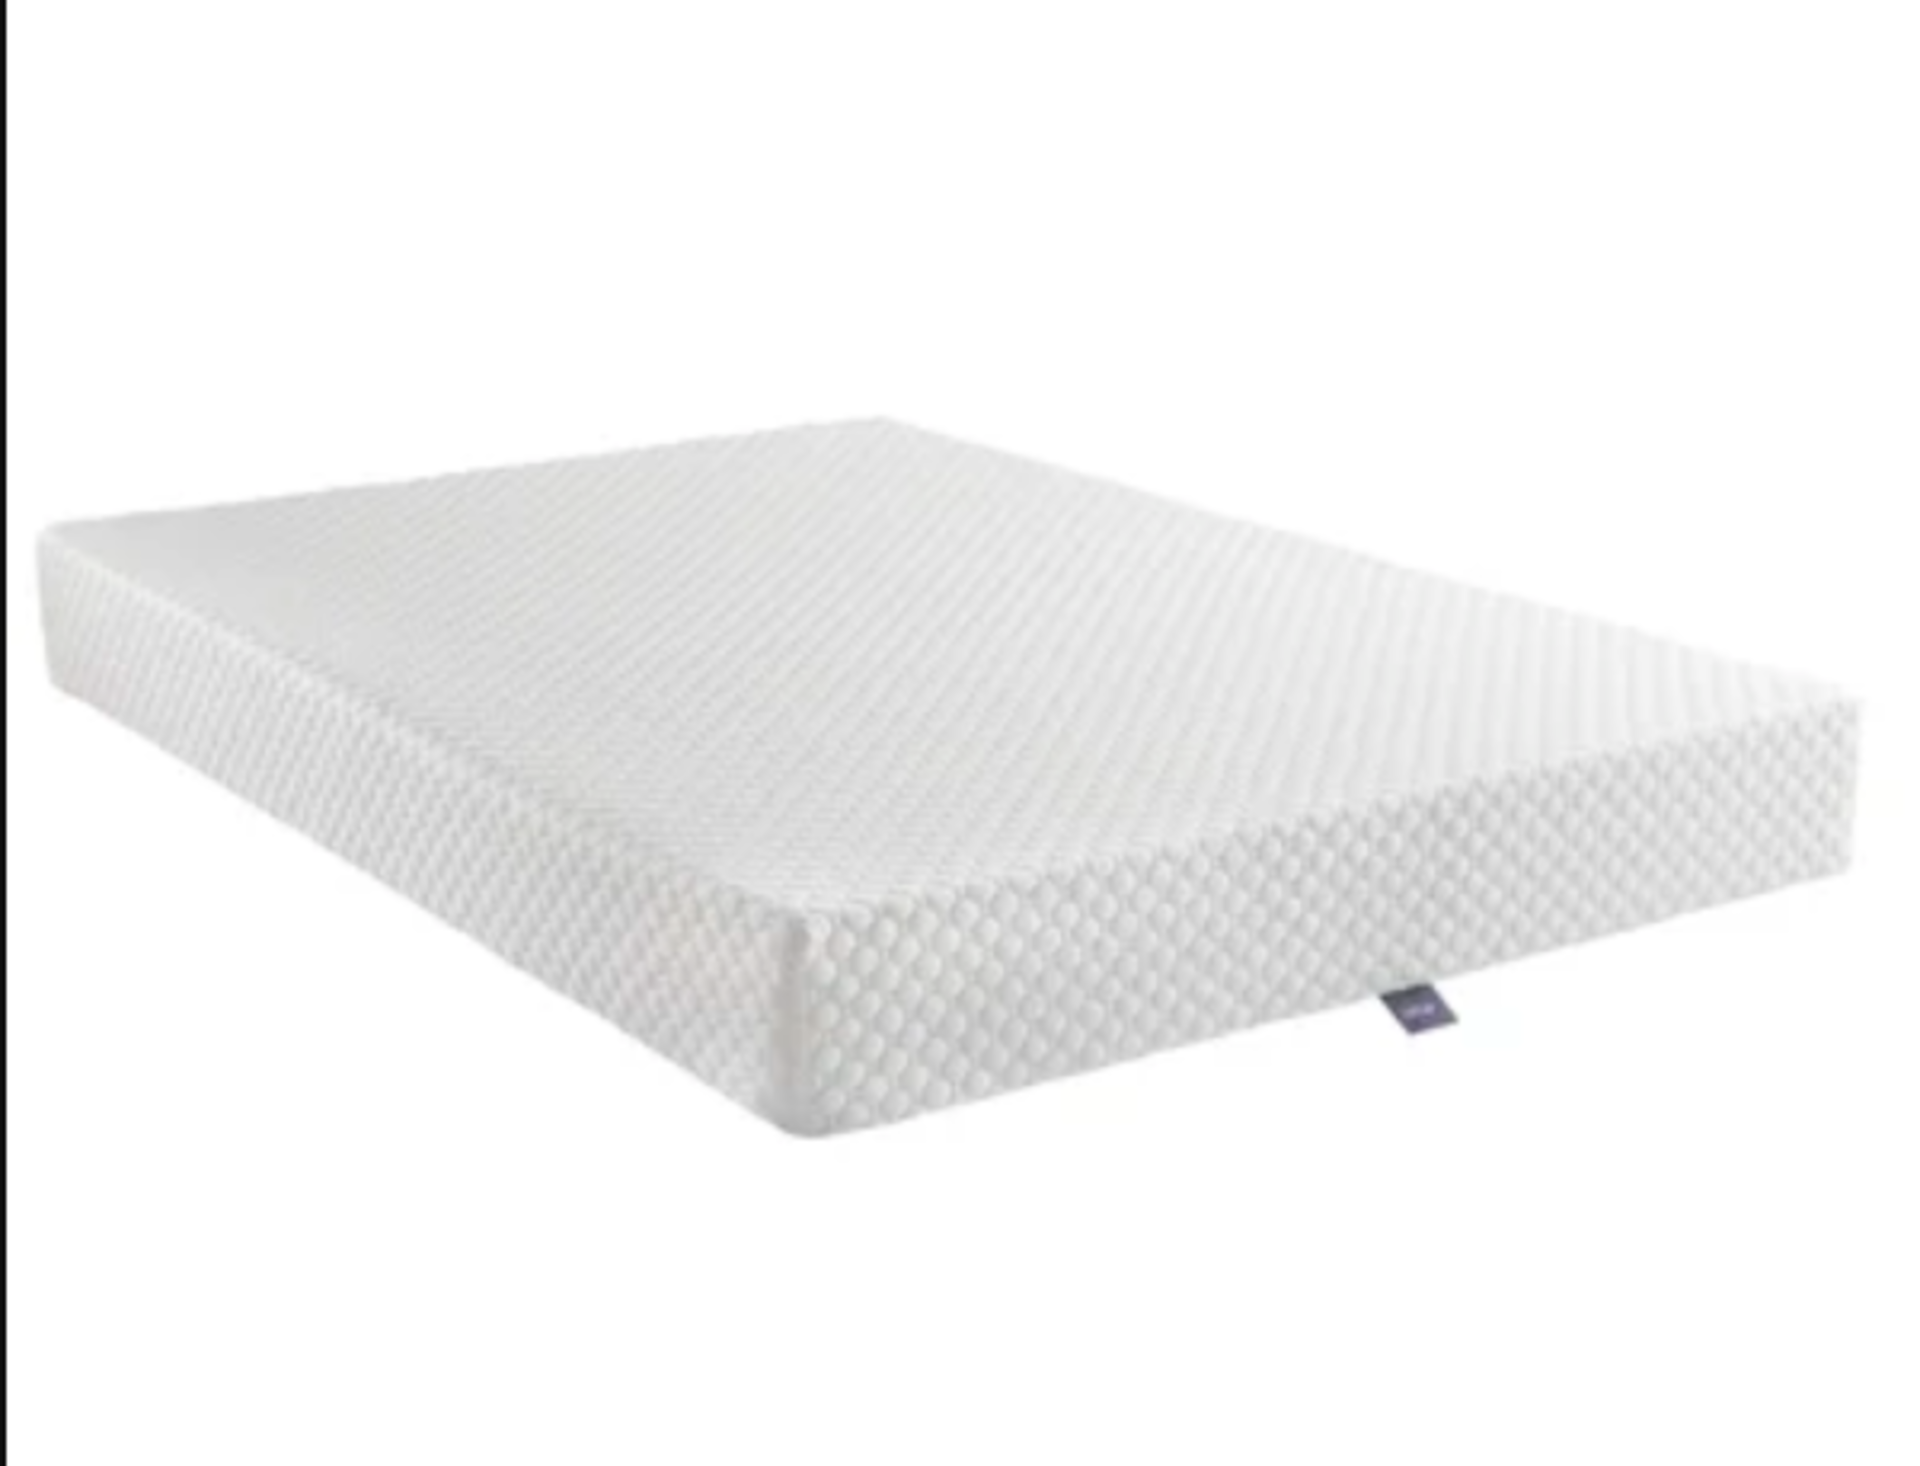 Silent Night 7-Zone Memory Foam Mattress. Double. The mattress contains a deep comfort layer of body